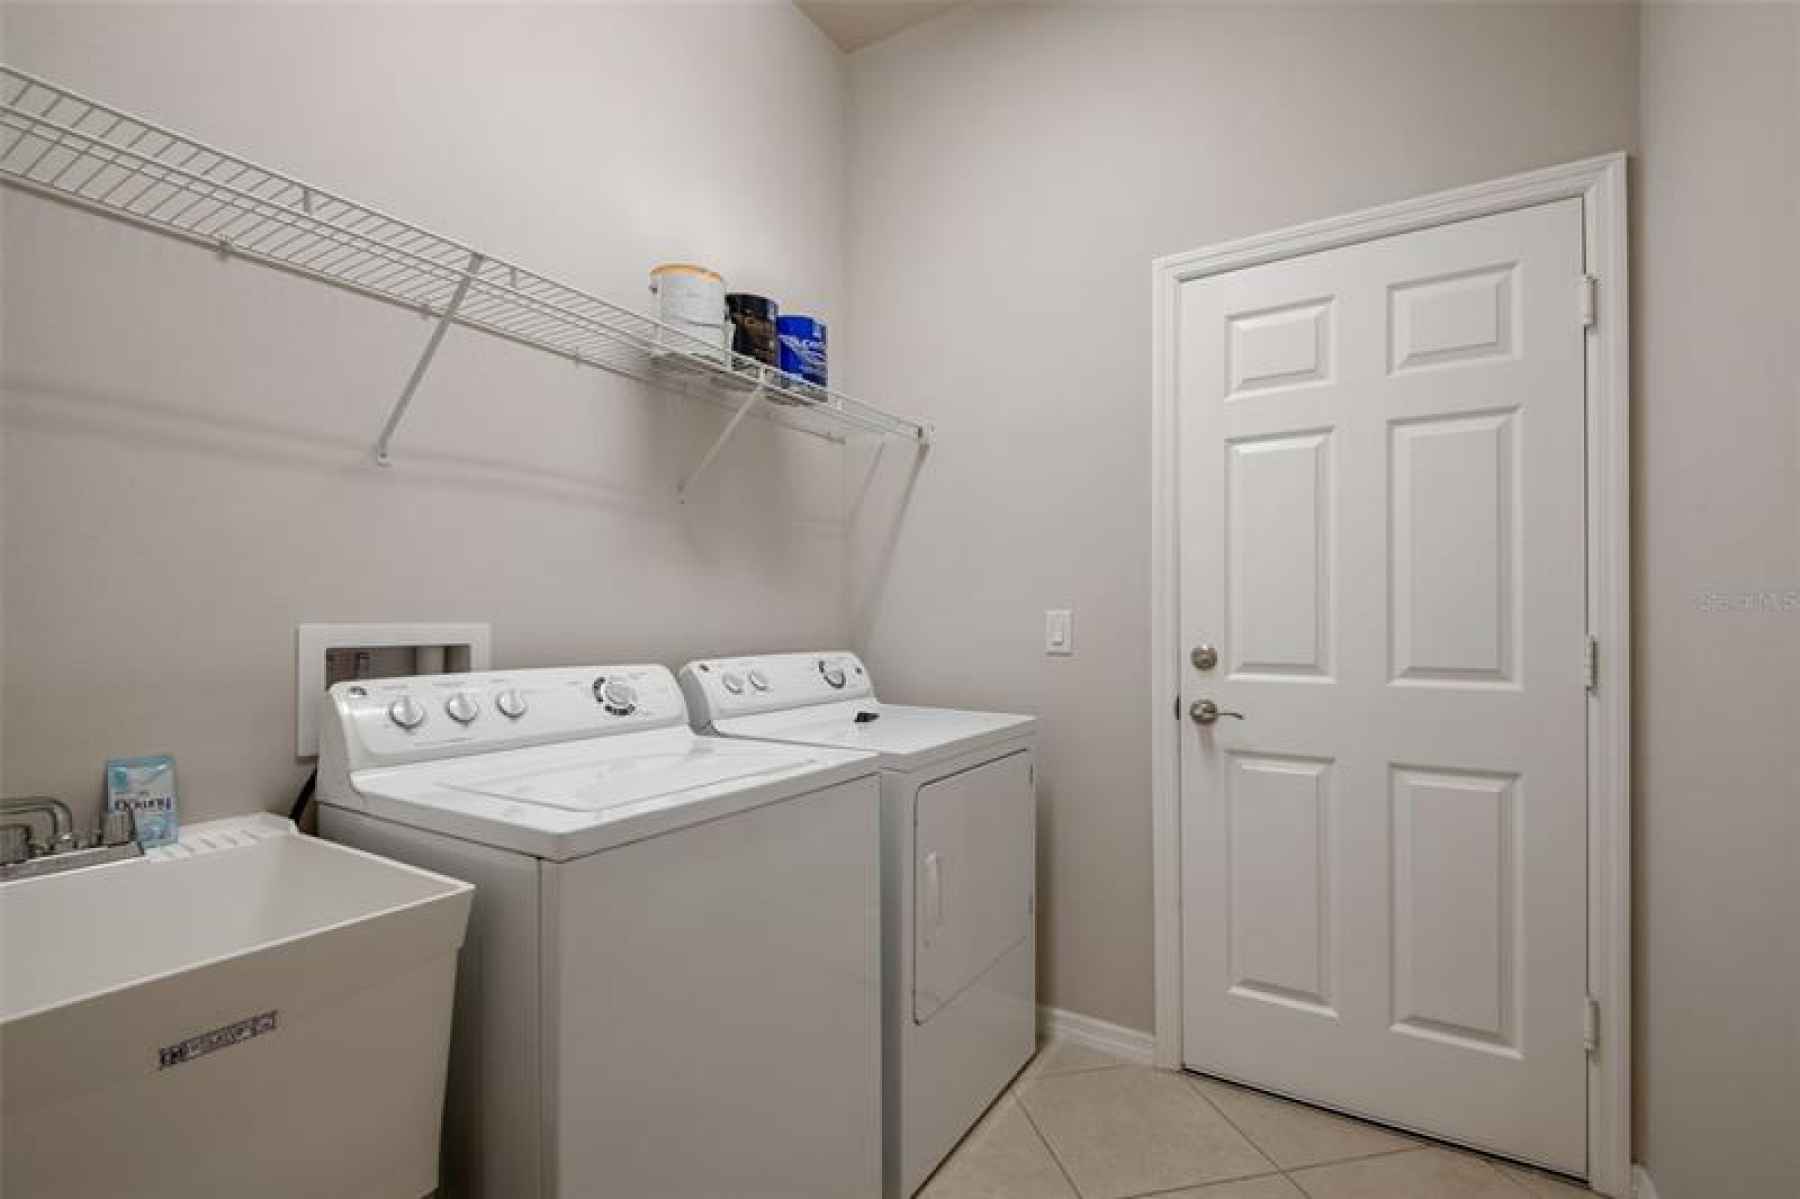 LAUNDRY ROOM WITH SLOP SINK , WASHER & DRYER